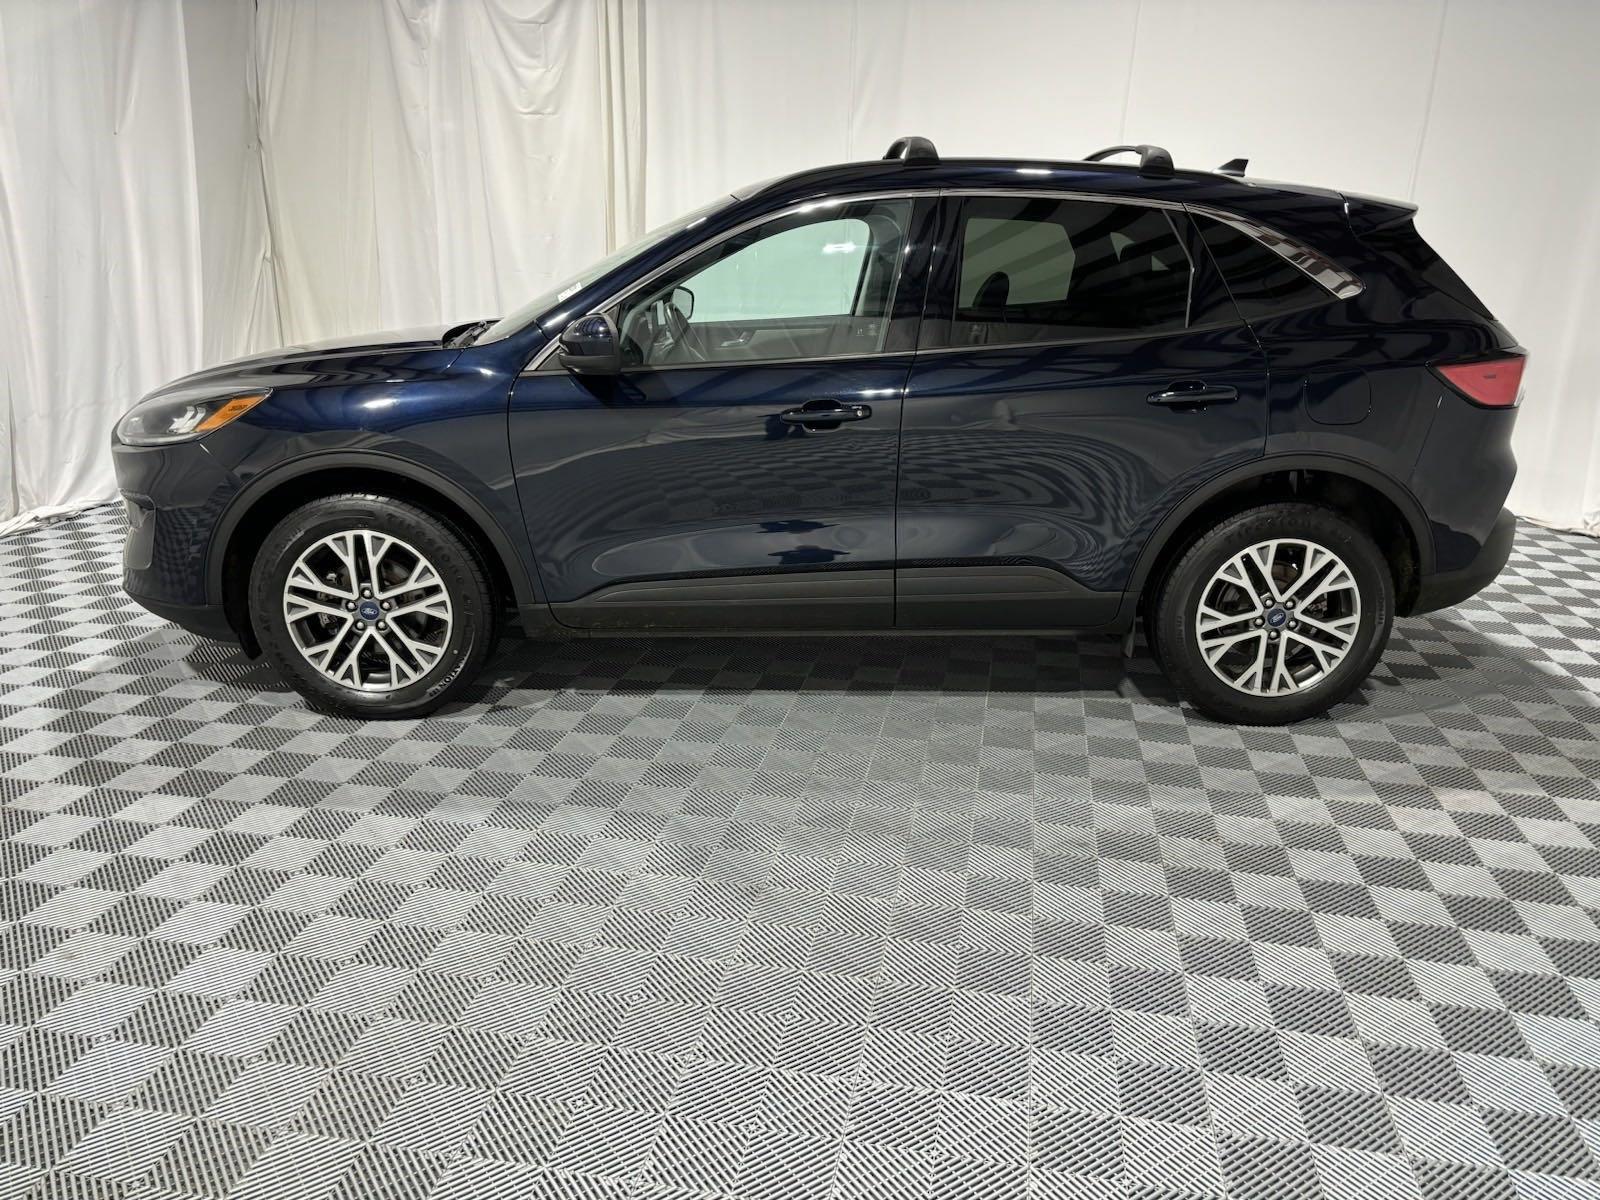 Used 2021 Ford Escape SEL Sport Utility for sale in St Joseph MO